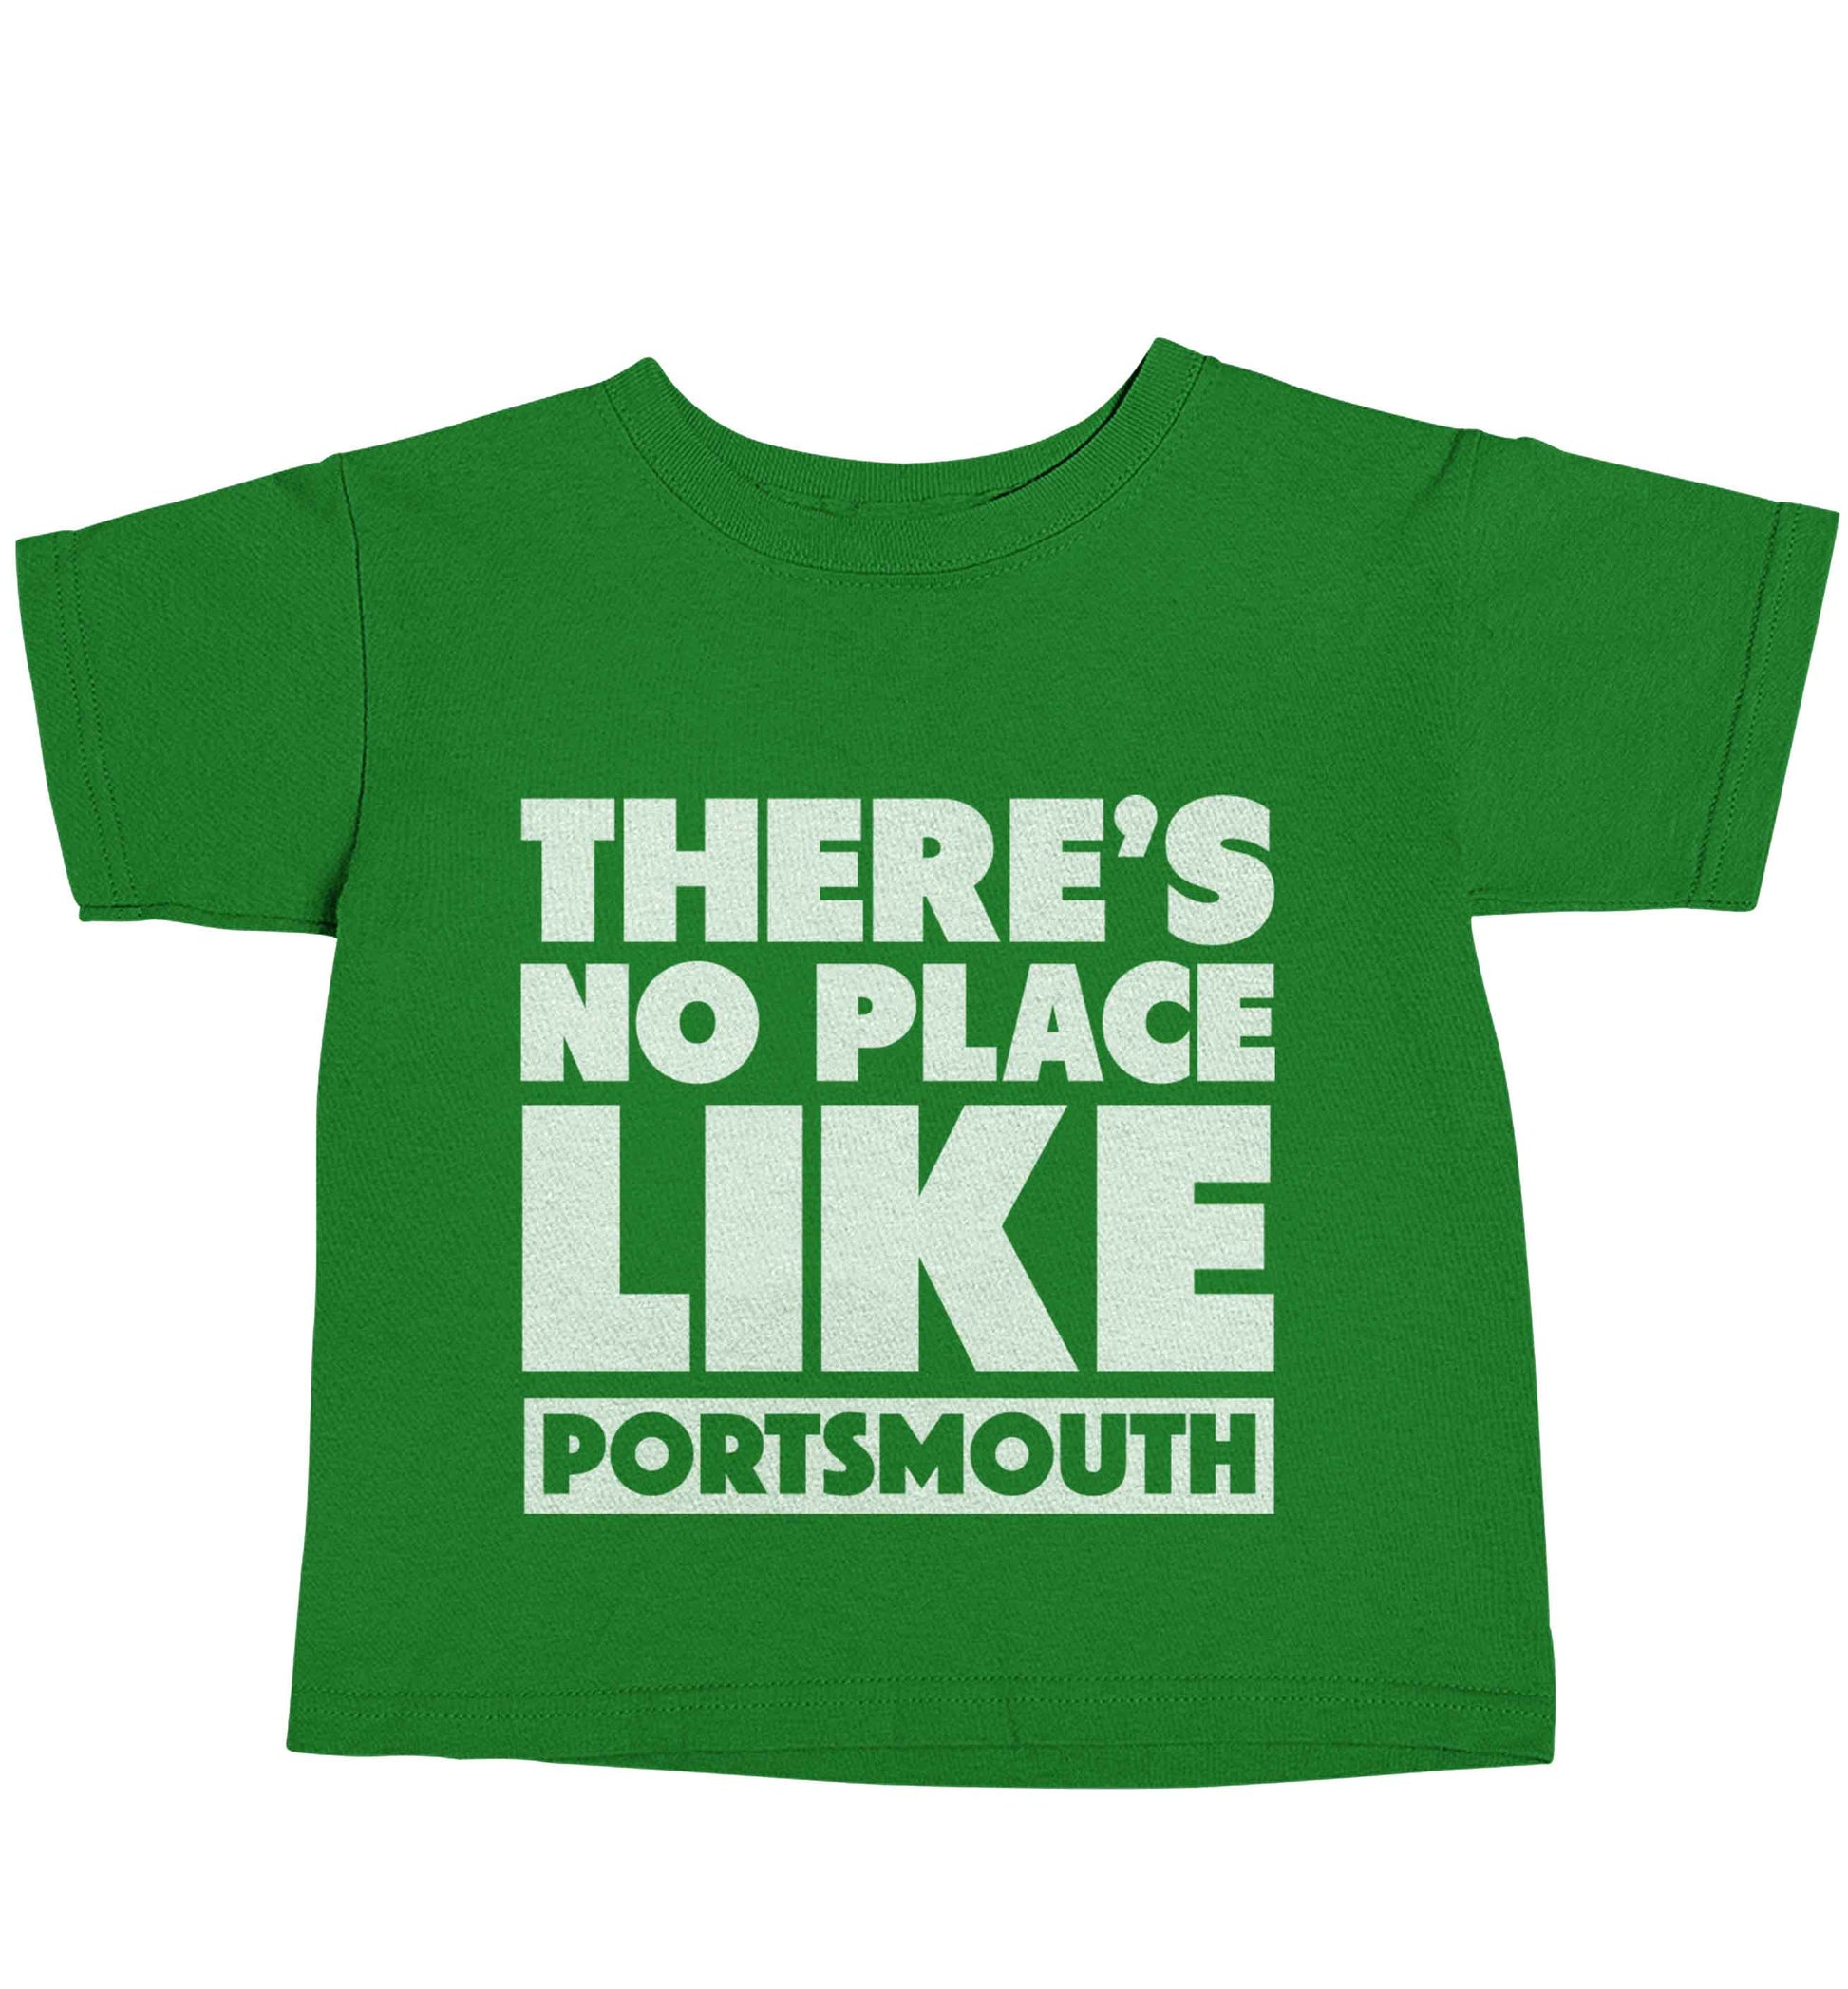 There's no place like Porstmouth green baby toddler Tshirt 2 Years